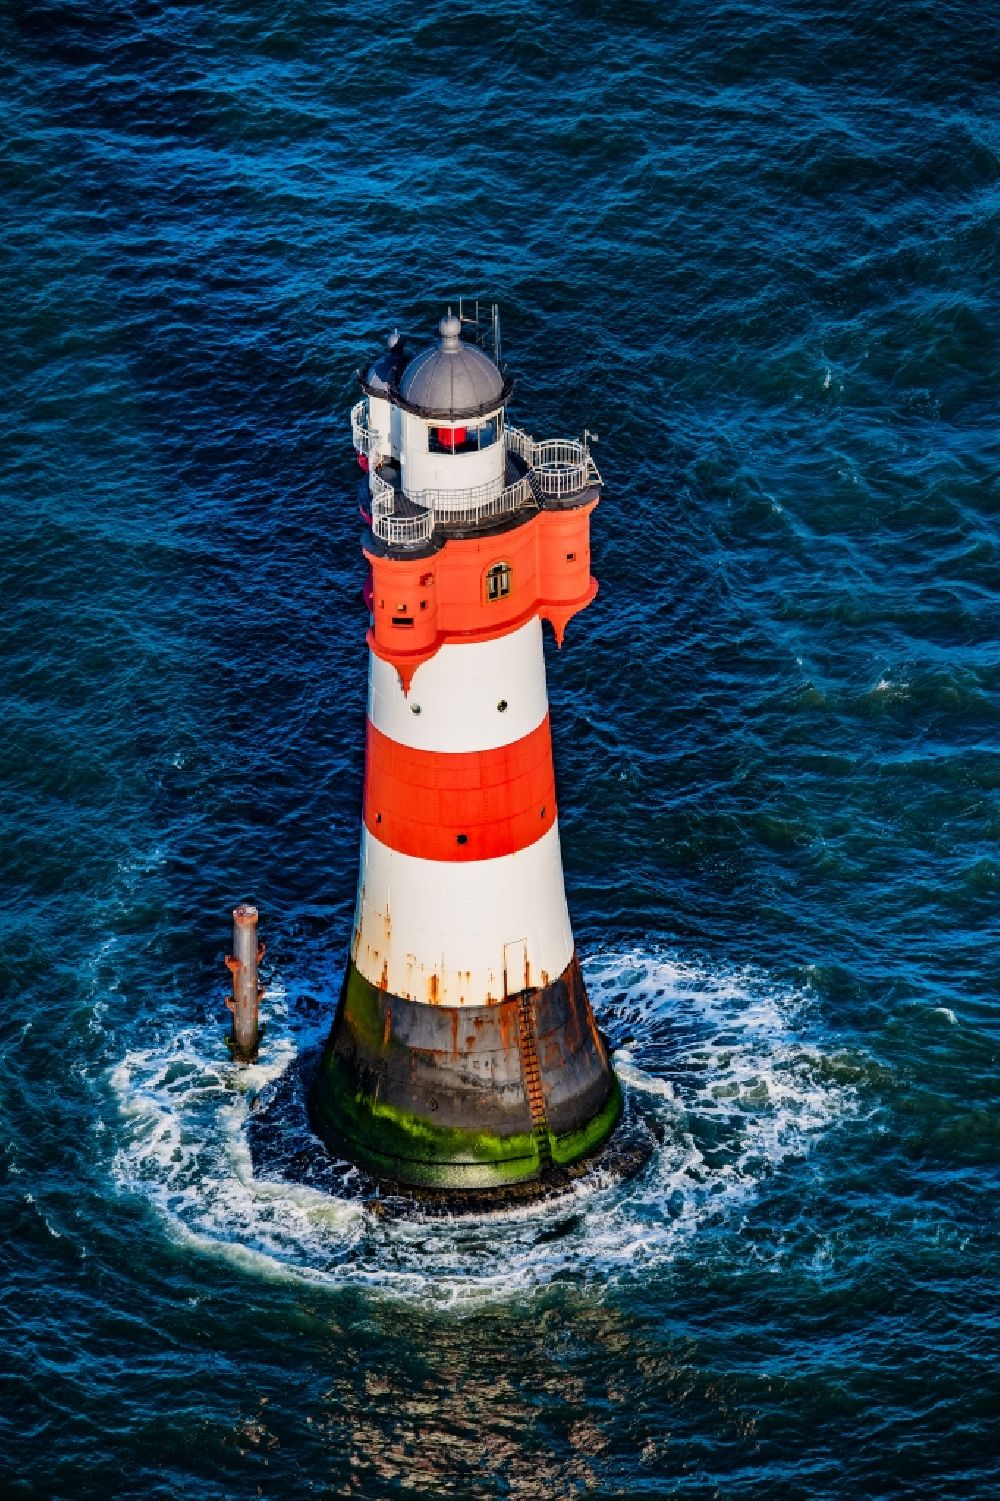 Aerial image Wangerooge - Lighthouse Roter Sand as a historic seafaring character in the waters of the North Sea by the mouth of the river Weser in Germany